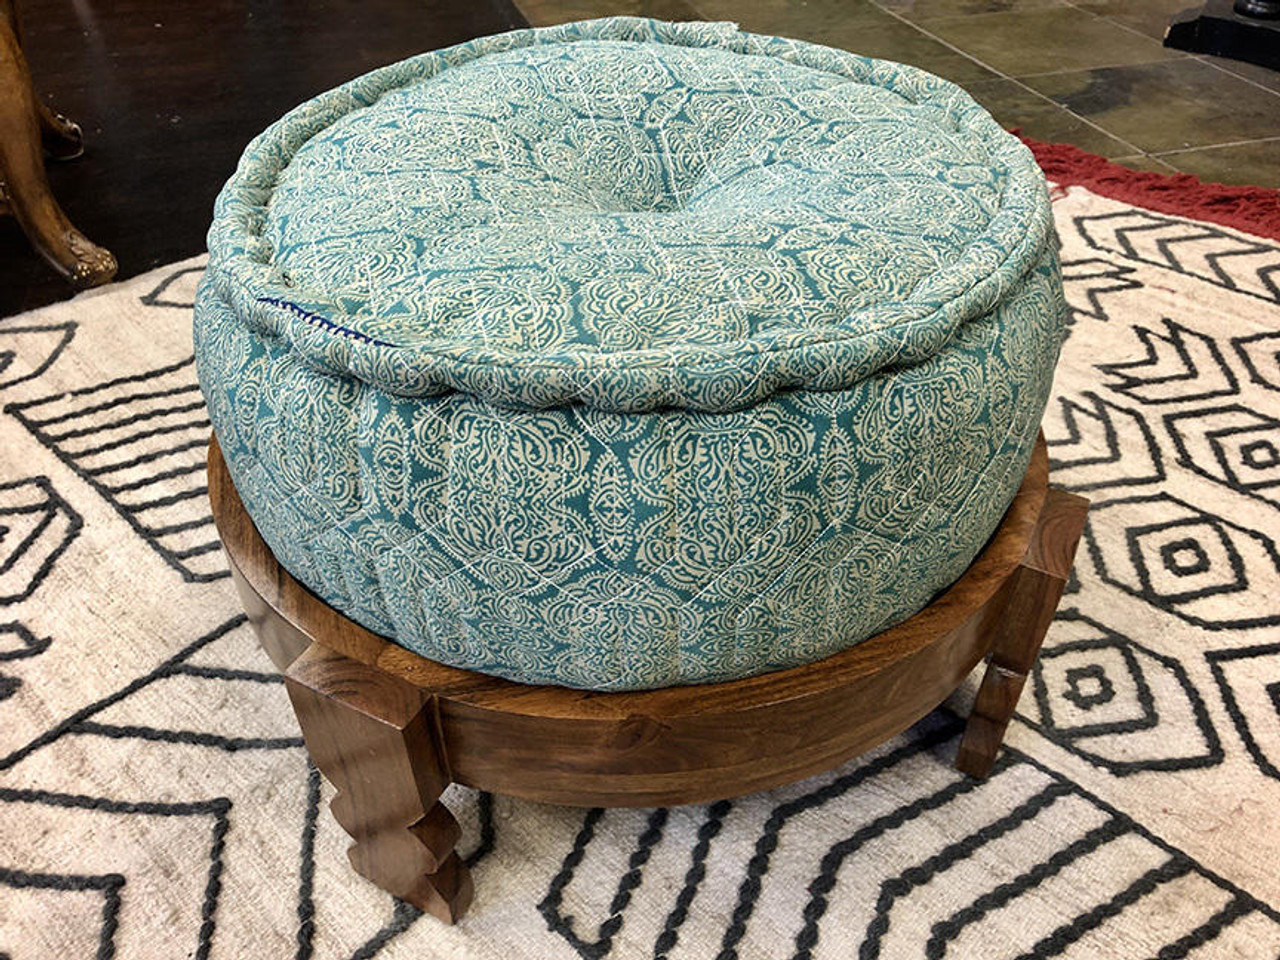 https://cdn11.bigcommerce.com/s-ndgwf6iffo/images/stencil/1280x1280/products/2087/8705/choki-round-wooden-side-table-and-convertible-ottoman-stool-cushion-not-included__07456.1660858830.jpg?c=2